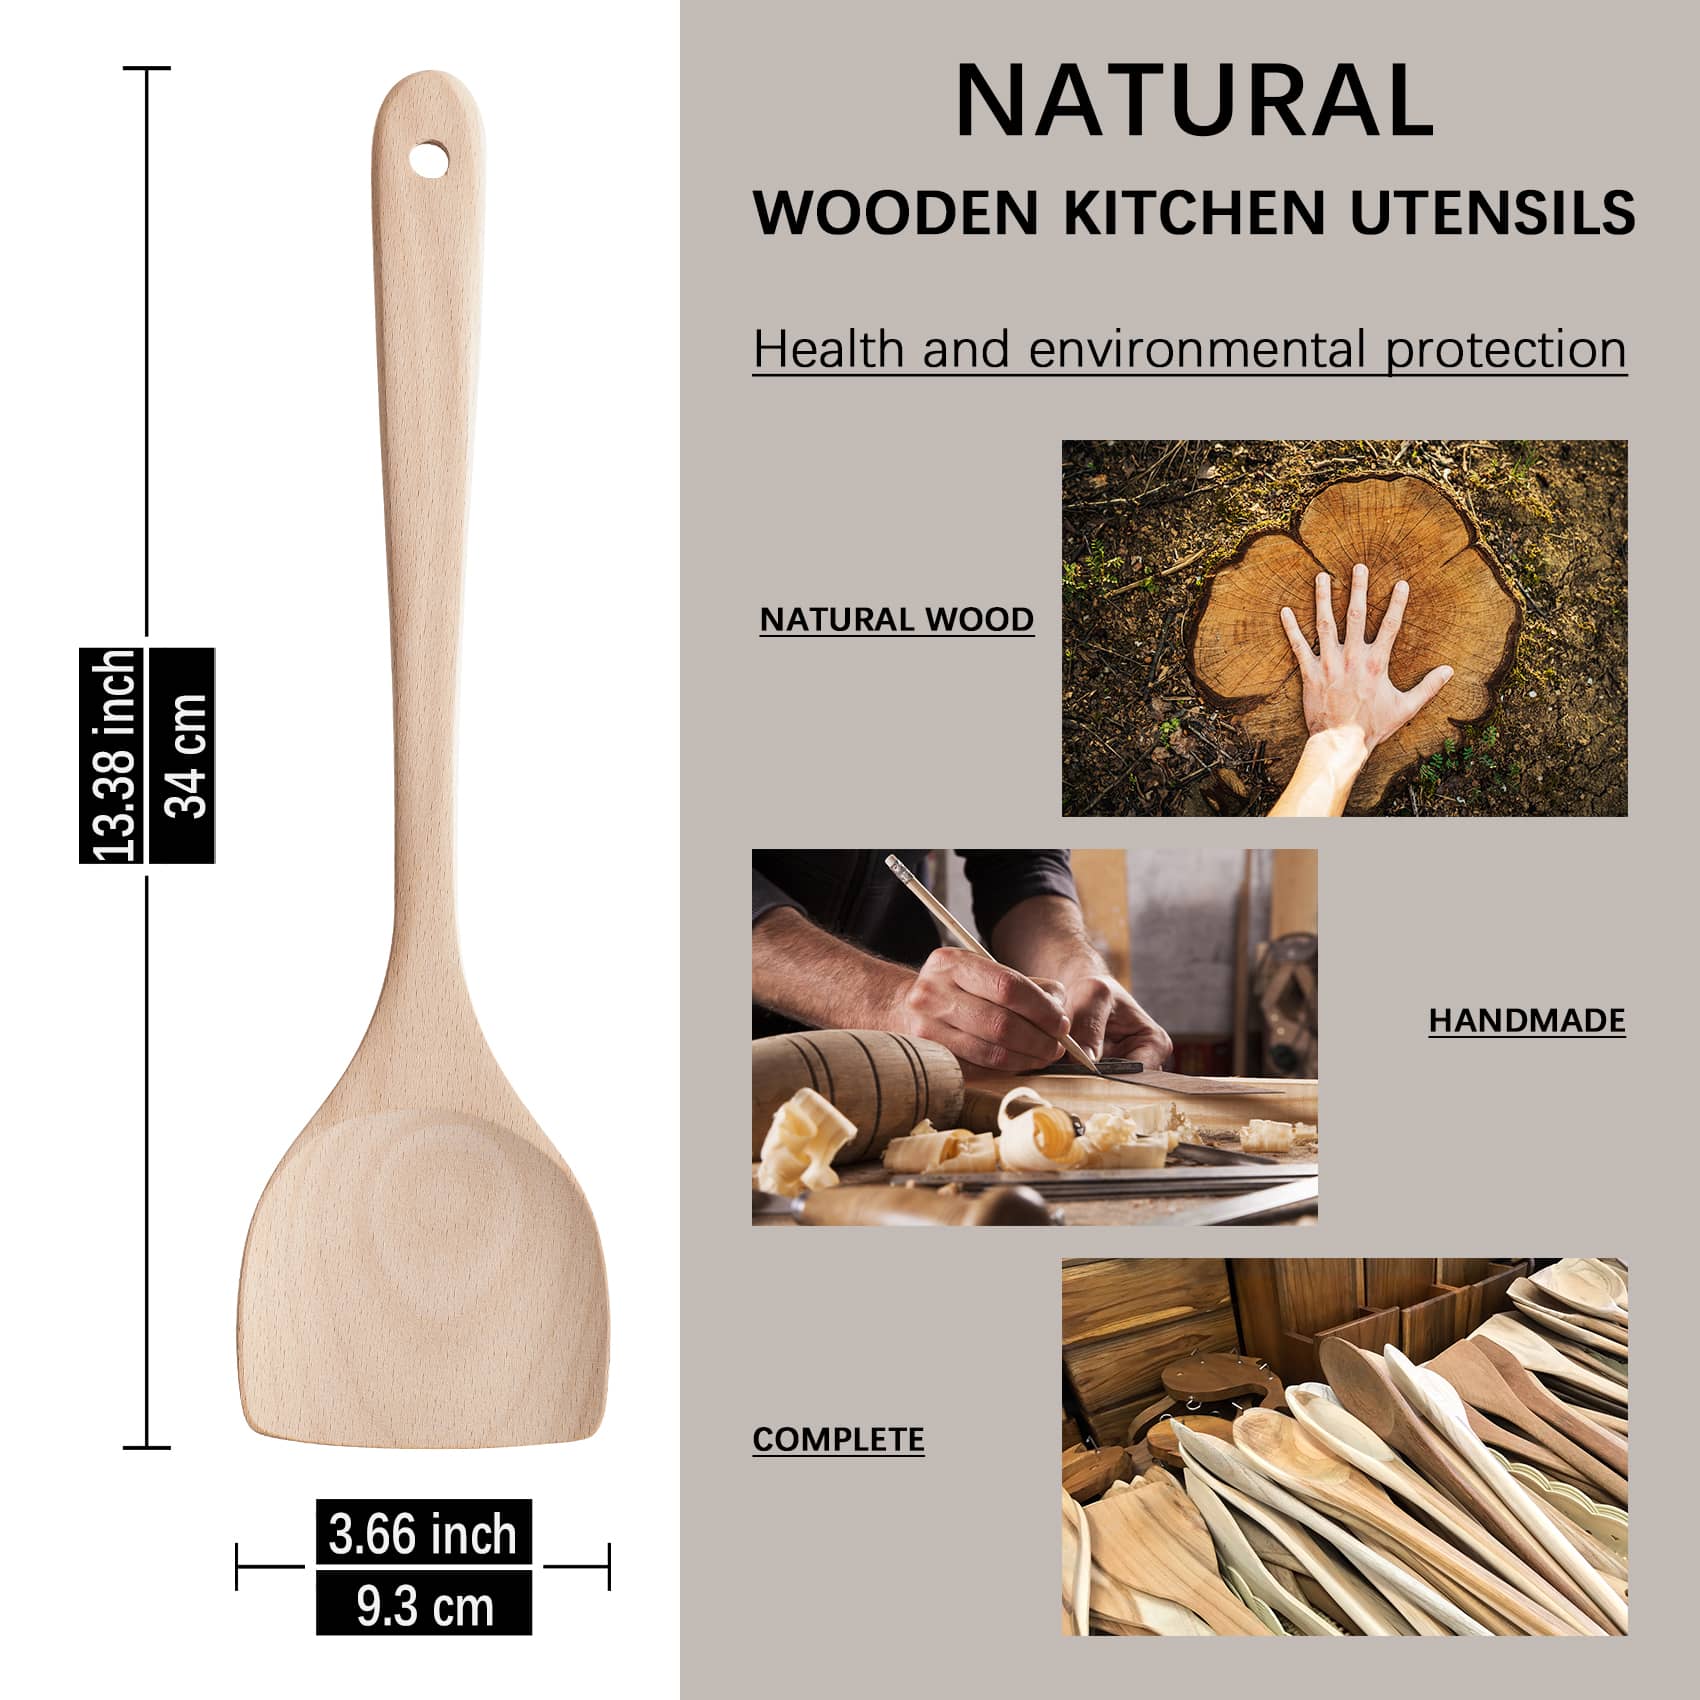 Wooden cooking spatula measures 13.3 inches in length and 3.6 inches in width, sanded from beechwood